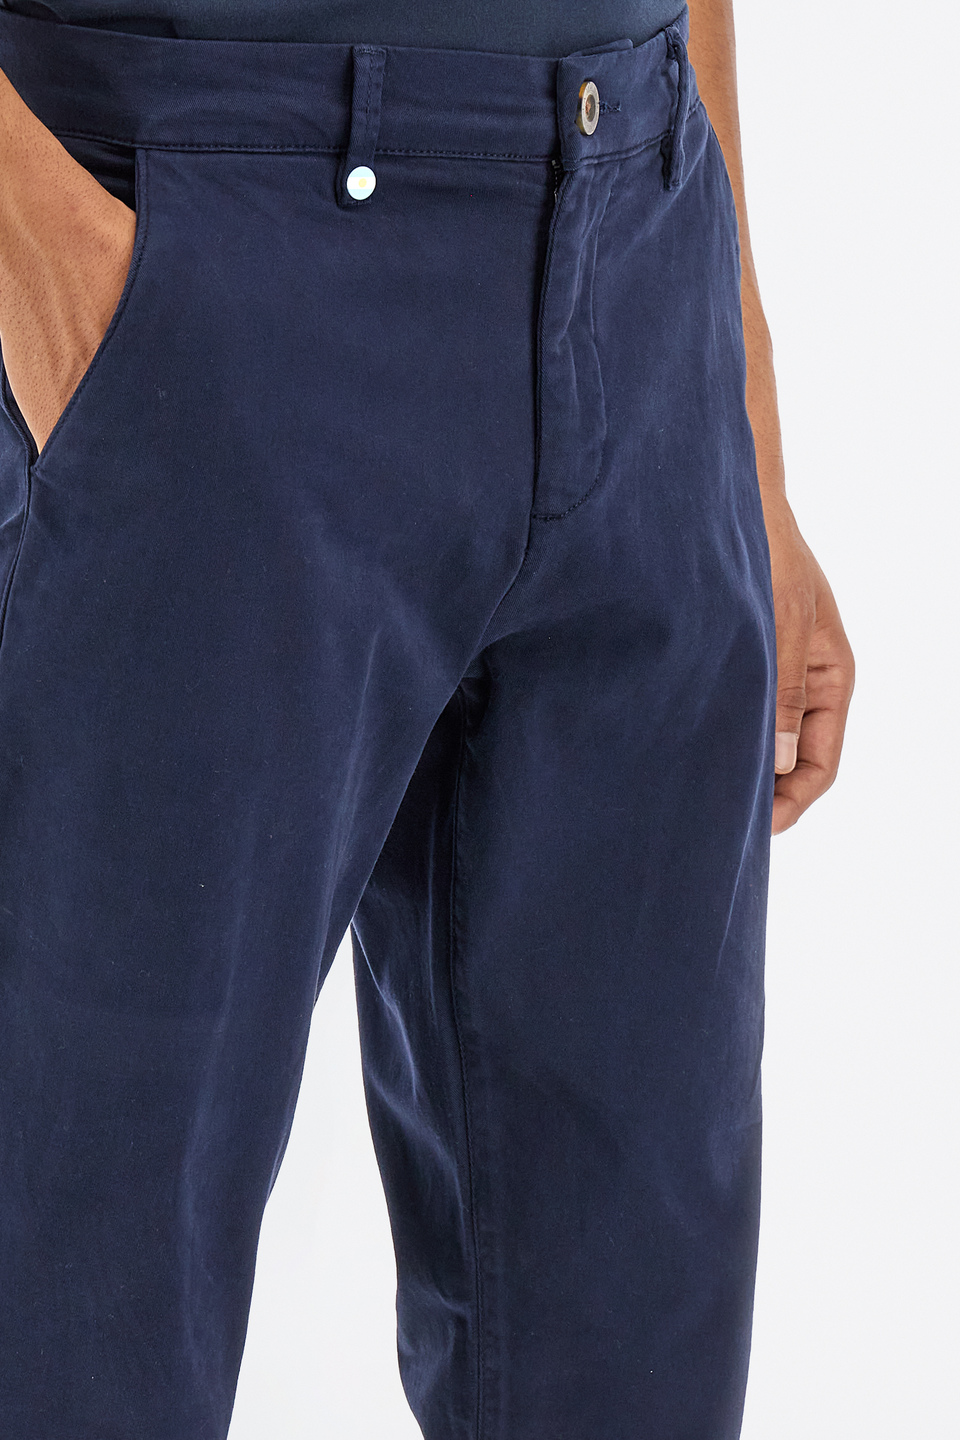 Slim fit chino stretch cotton trousers for men | La Martina - Official Online Shop